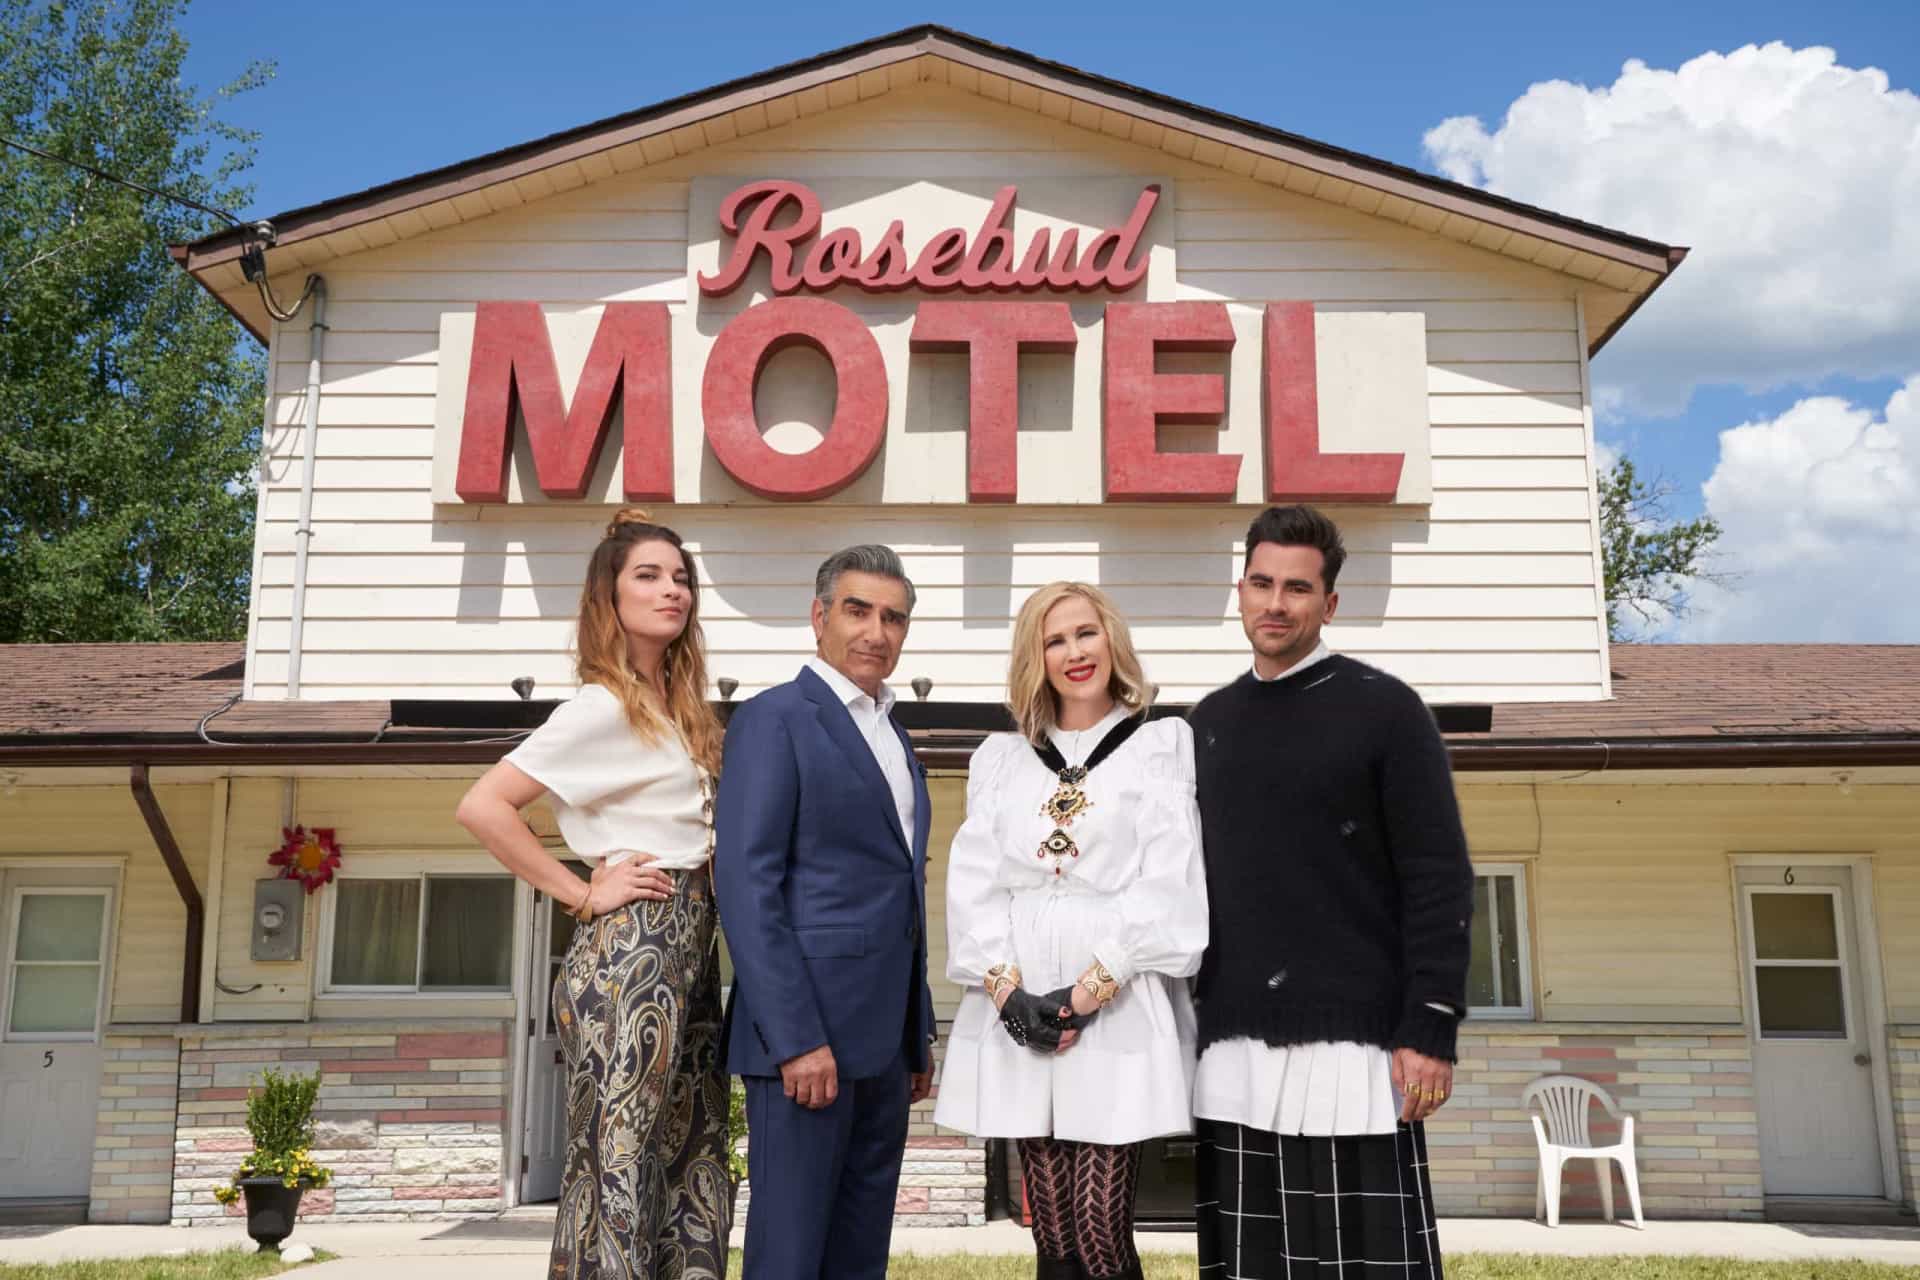 <p>Johnny Rose bought the town of Schitt’s Creek as a joke for his son's birthday, but the Rose family ended up living there after losing their fortune. They're indeed a quirky family in a quirky town.</p>